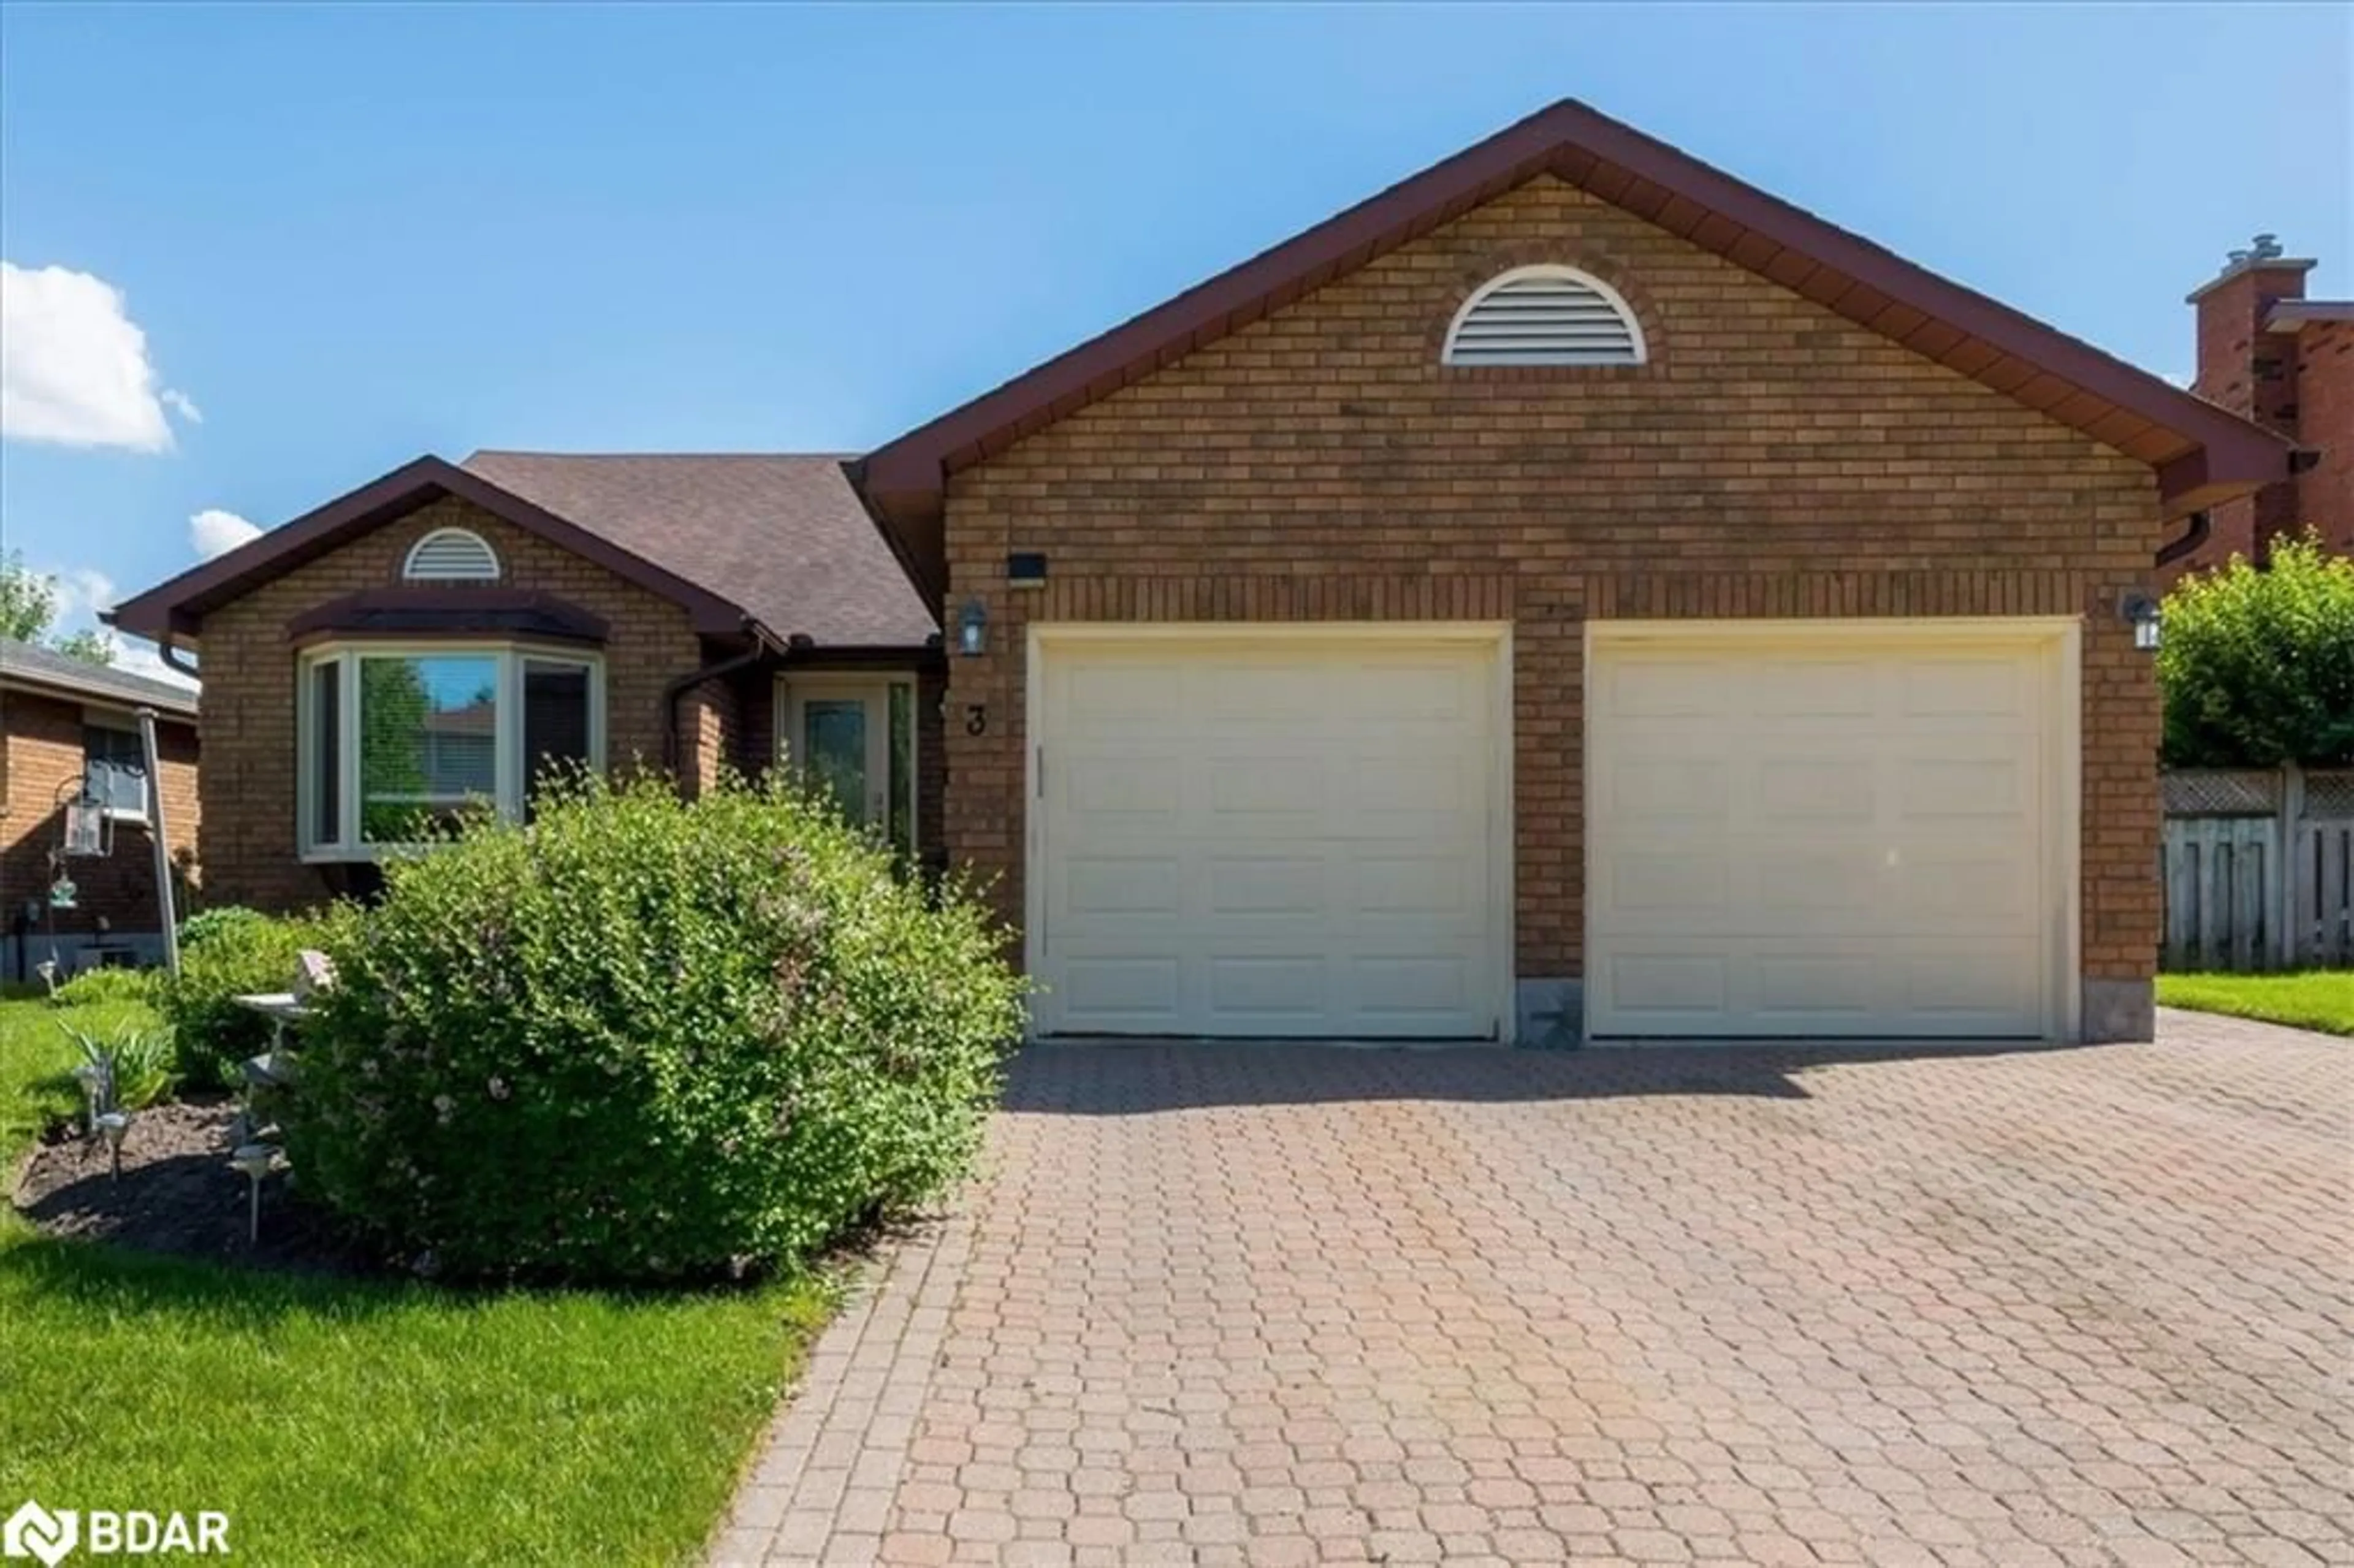 Home with brick exterior material for 3 Douglas Dr, Barrie Ontario L4M 5R8